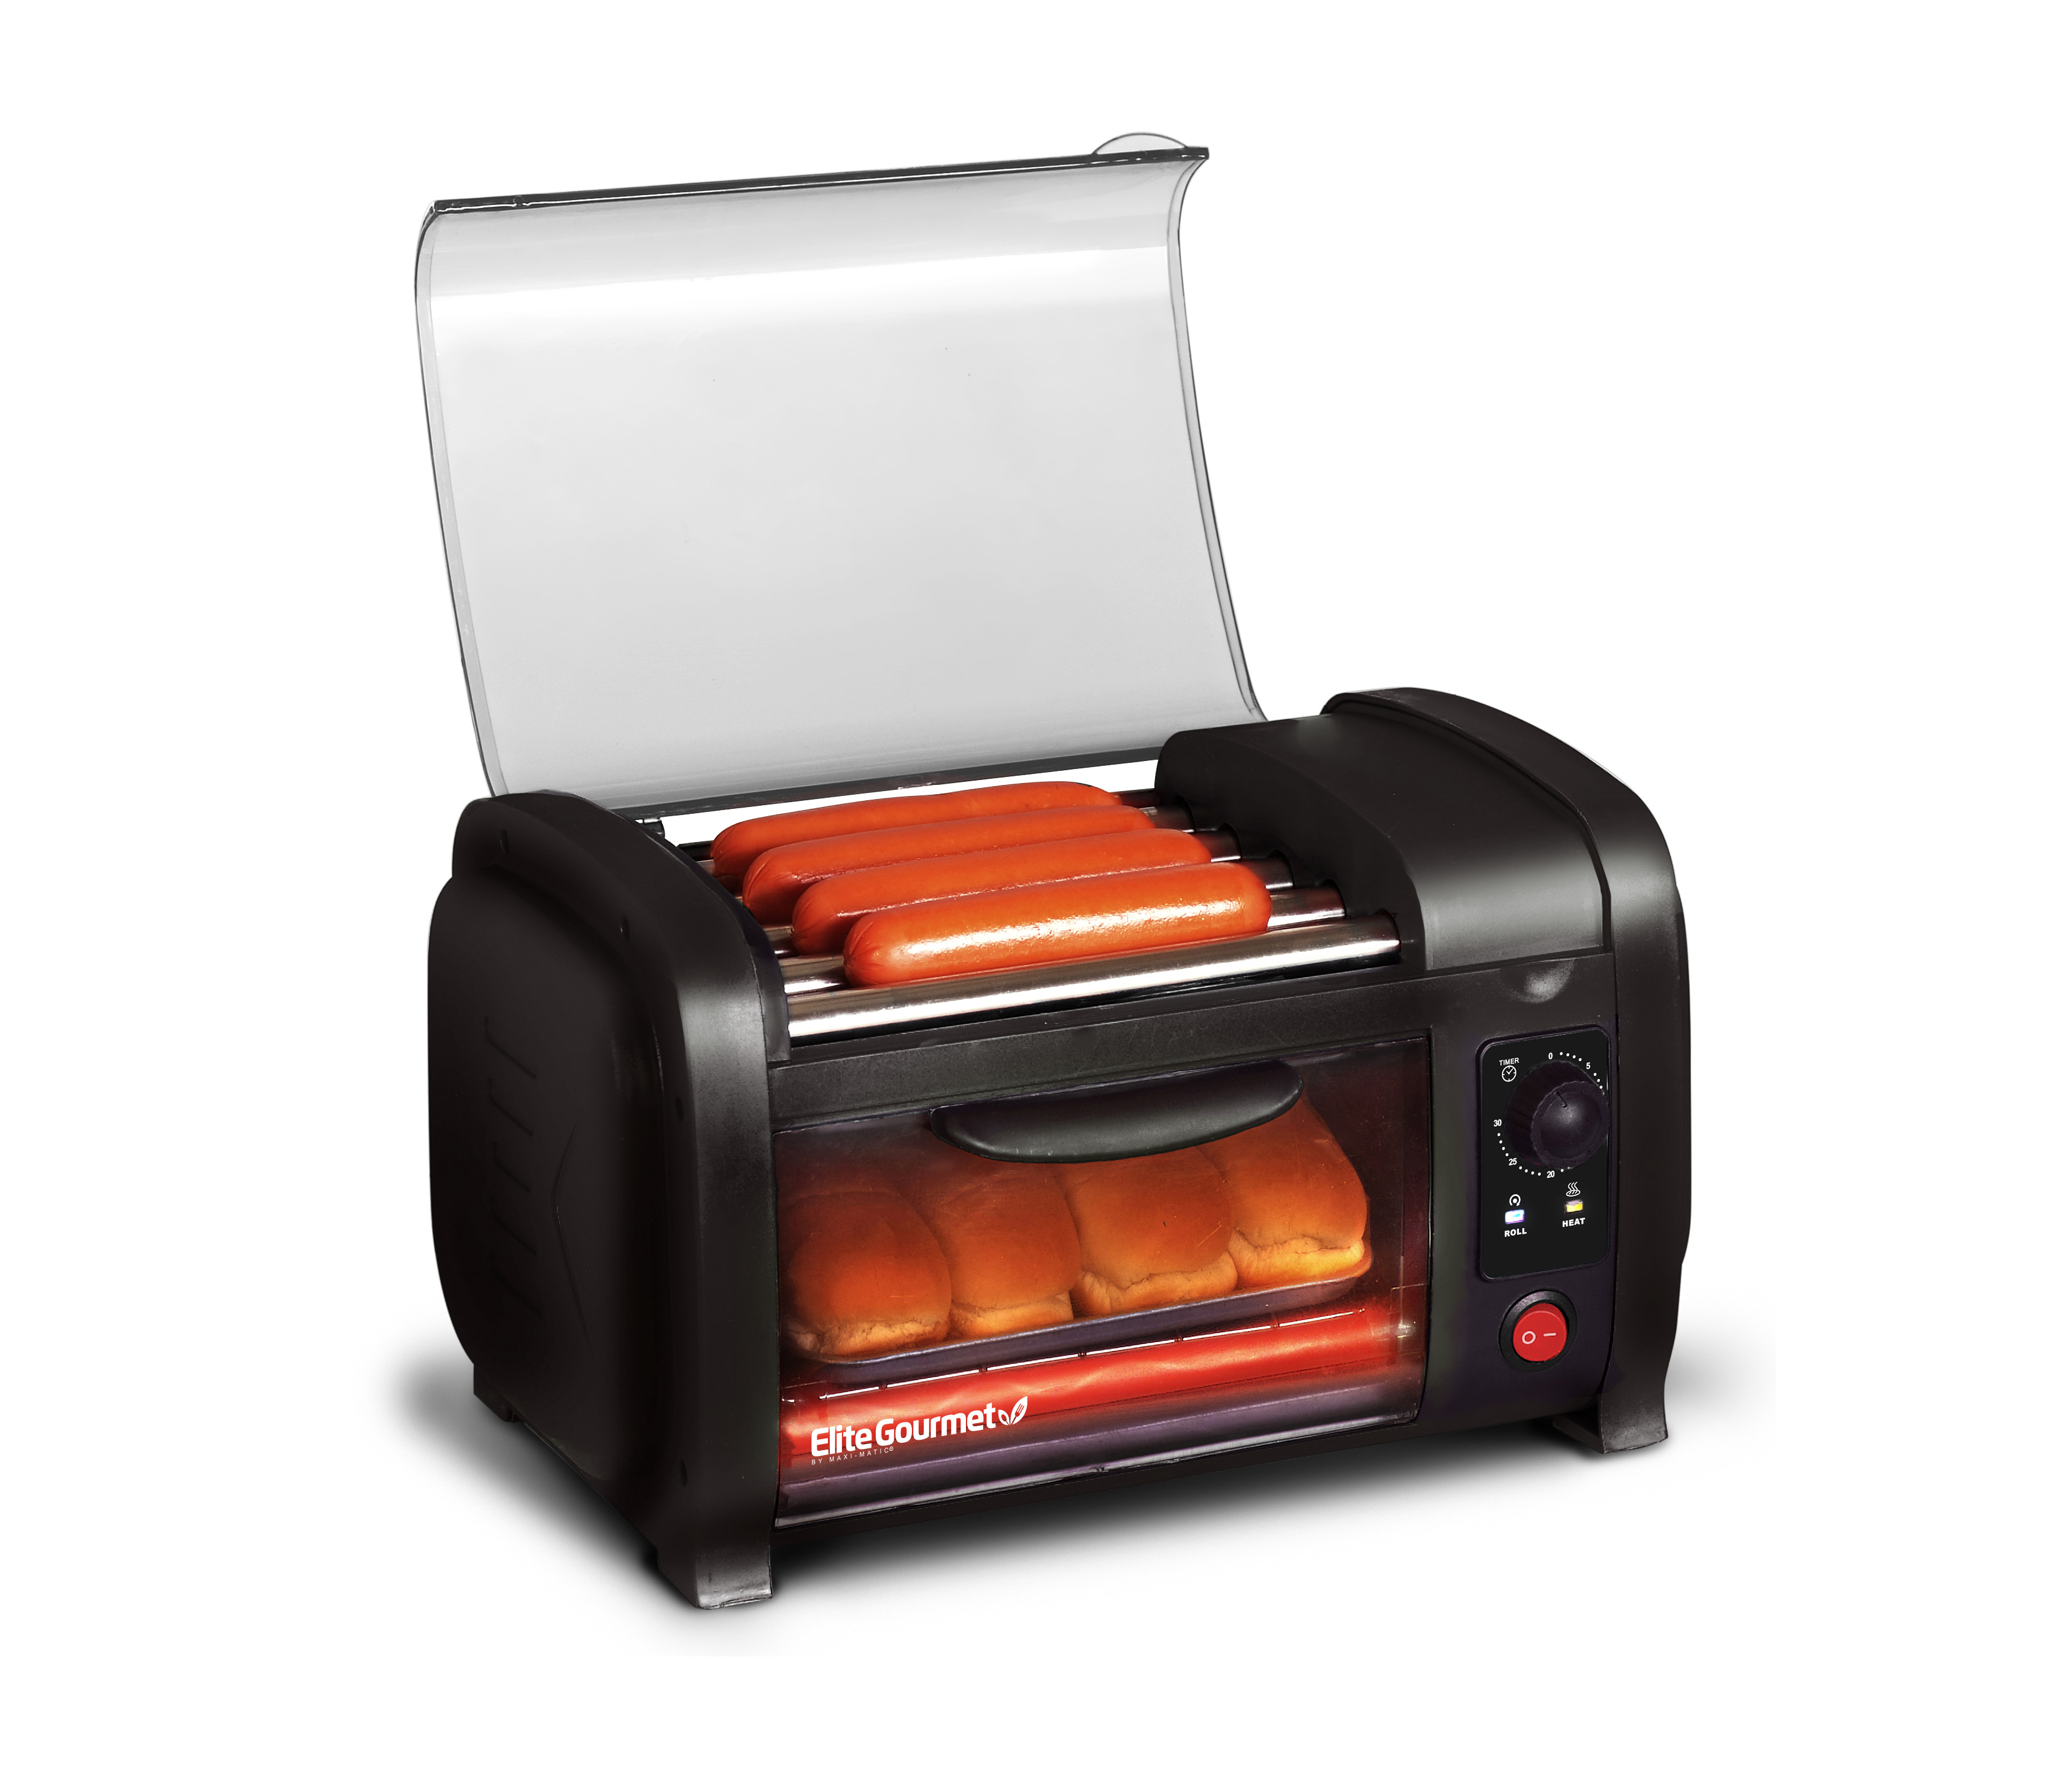 Elite Gourmet EHD-051B New Cuisine  Hot Dog Roller and Toaster Oven, Black - image 1 of 6